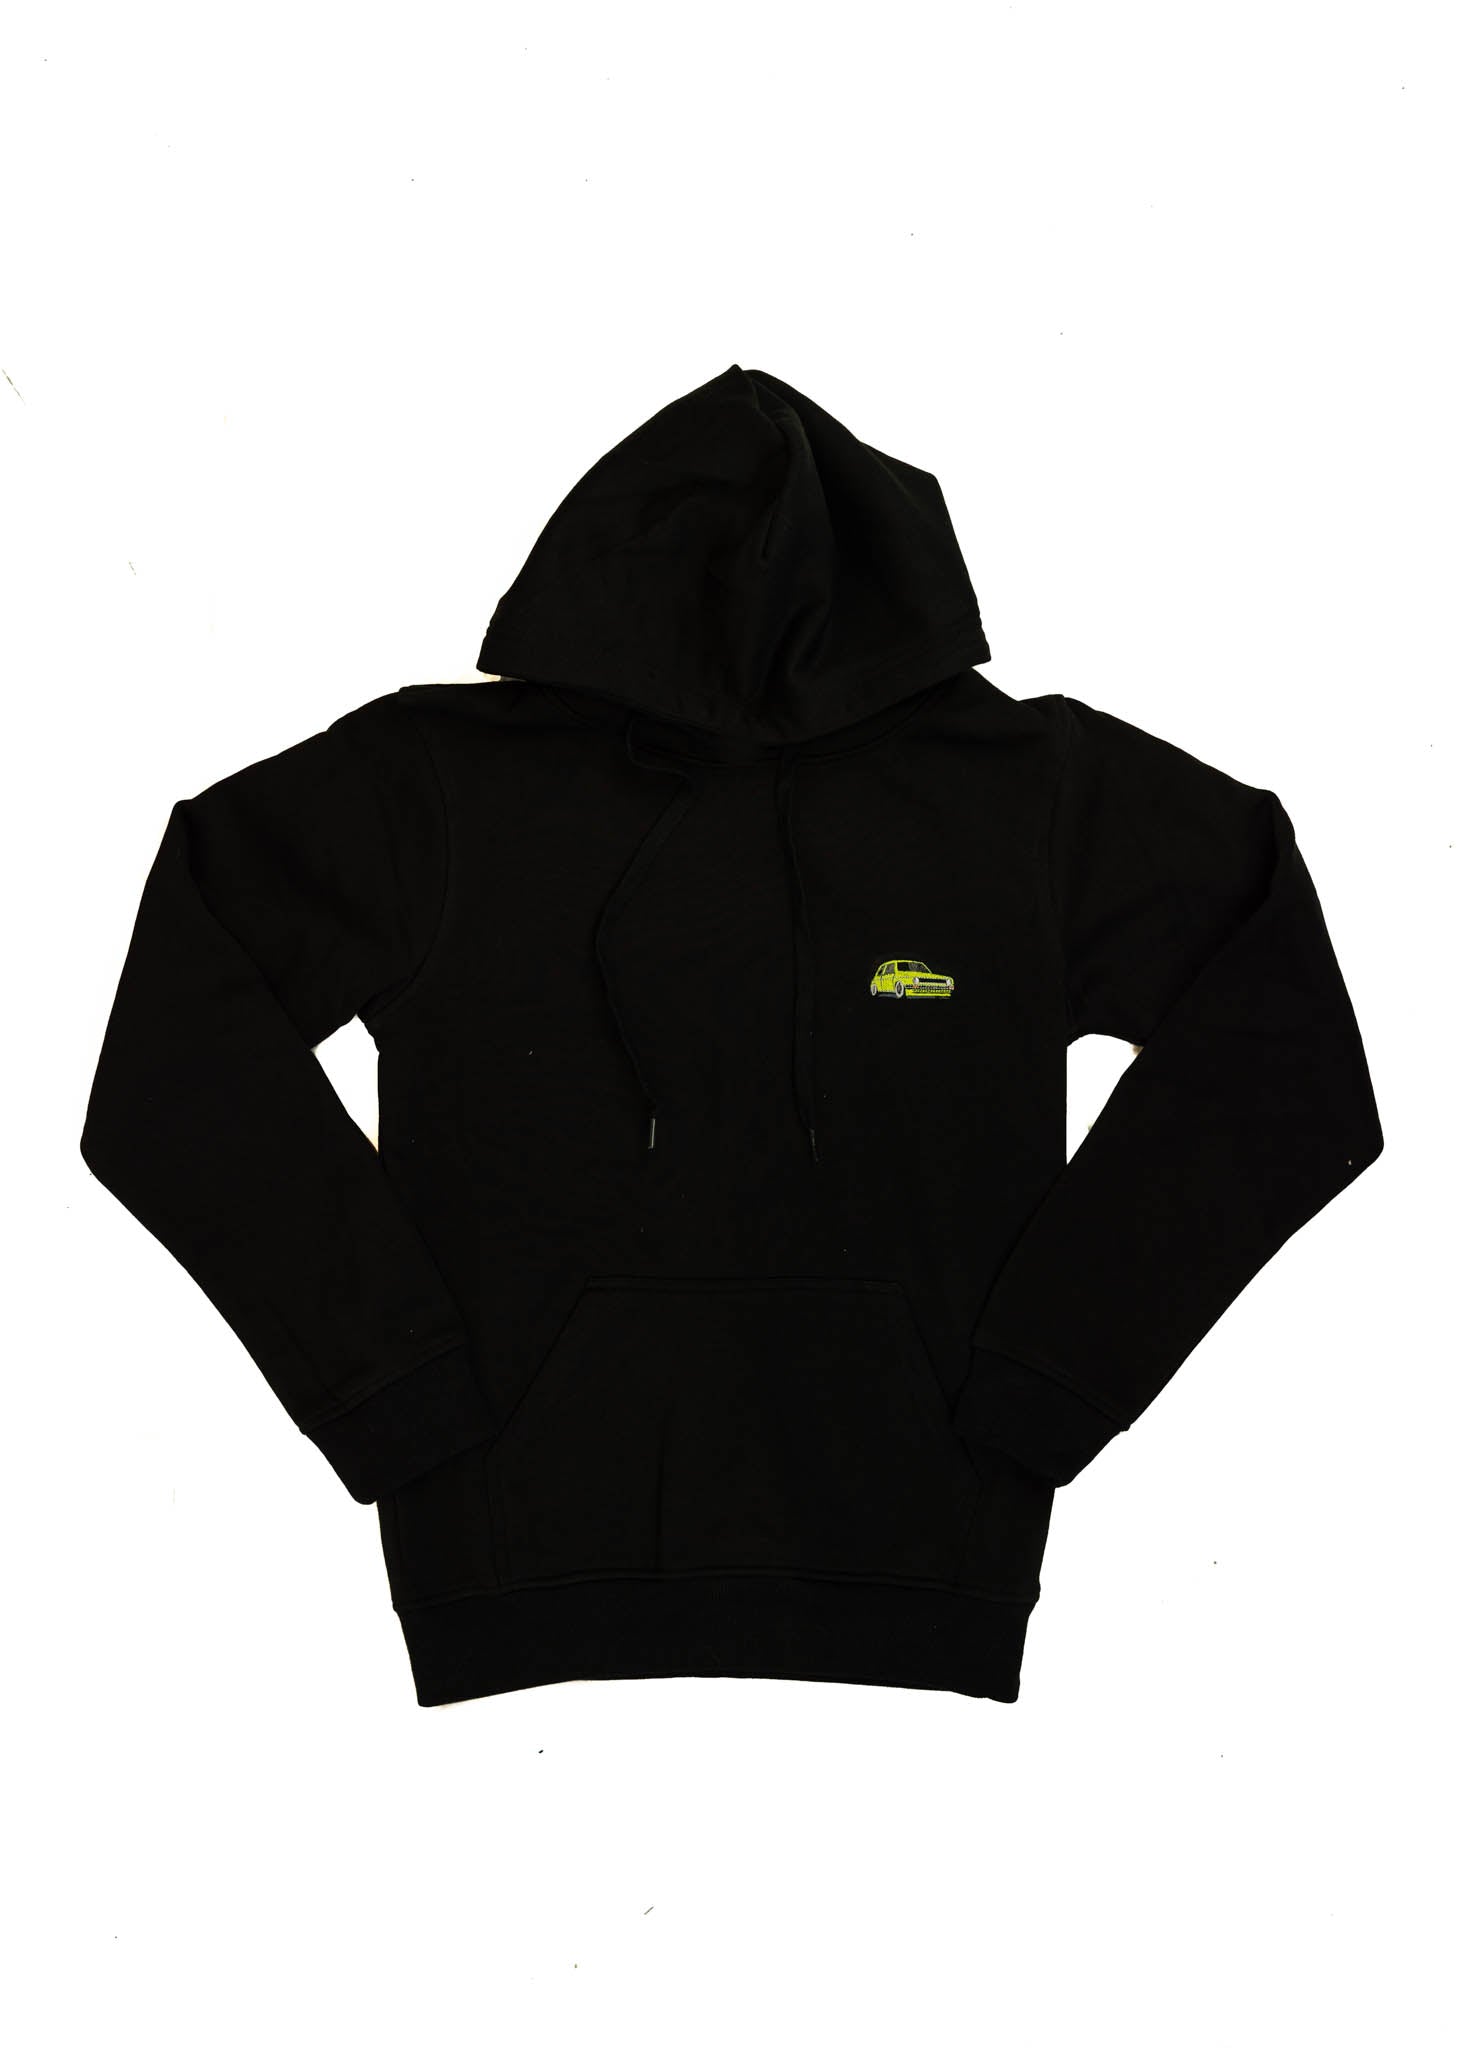 A black VW Volkswagen unisex hoodie for men and women. Photo is a front view of the sweater with an embroidered modified green Mk1 Golf. Fabric composition is cotton, polyester, and rayon. The material is very soft, stretchy, and non-transparent. The style of this hoodie is long sleeve, crewneck with a hood, hooded, with embroidery on the left chest.